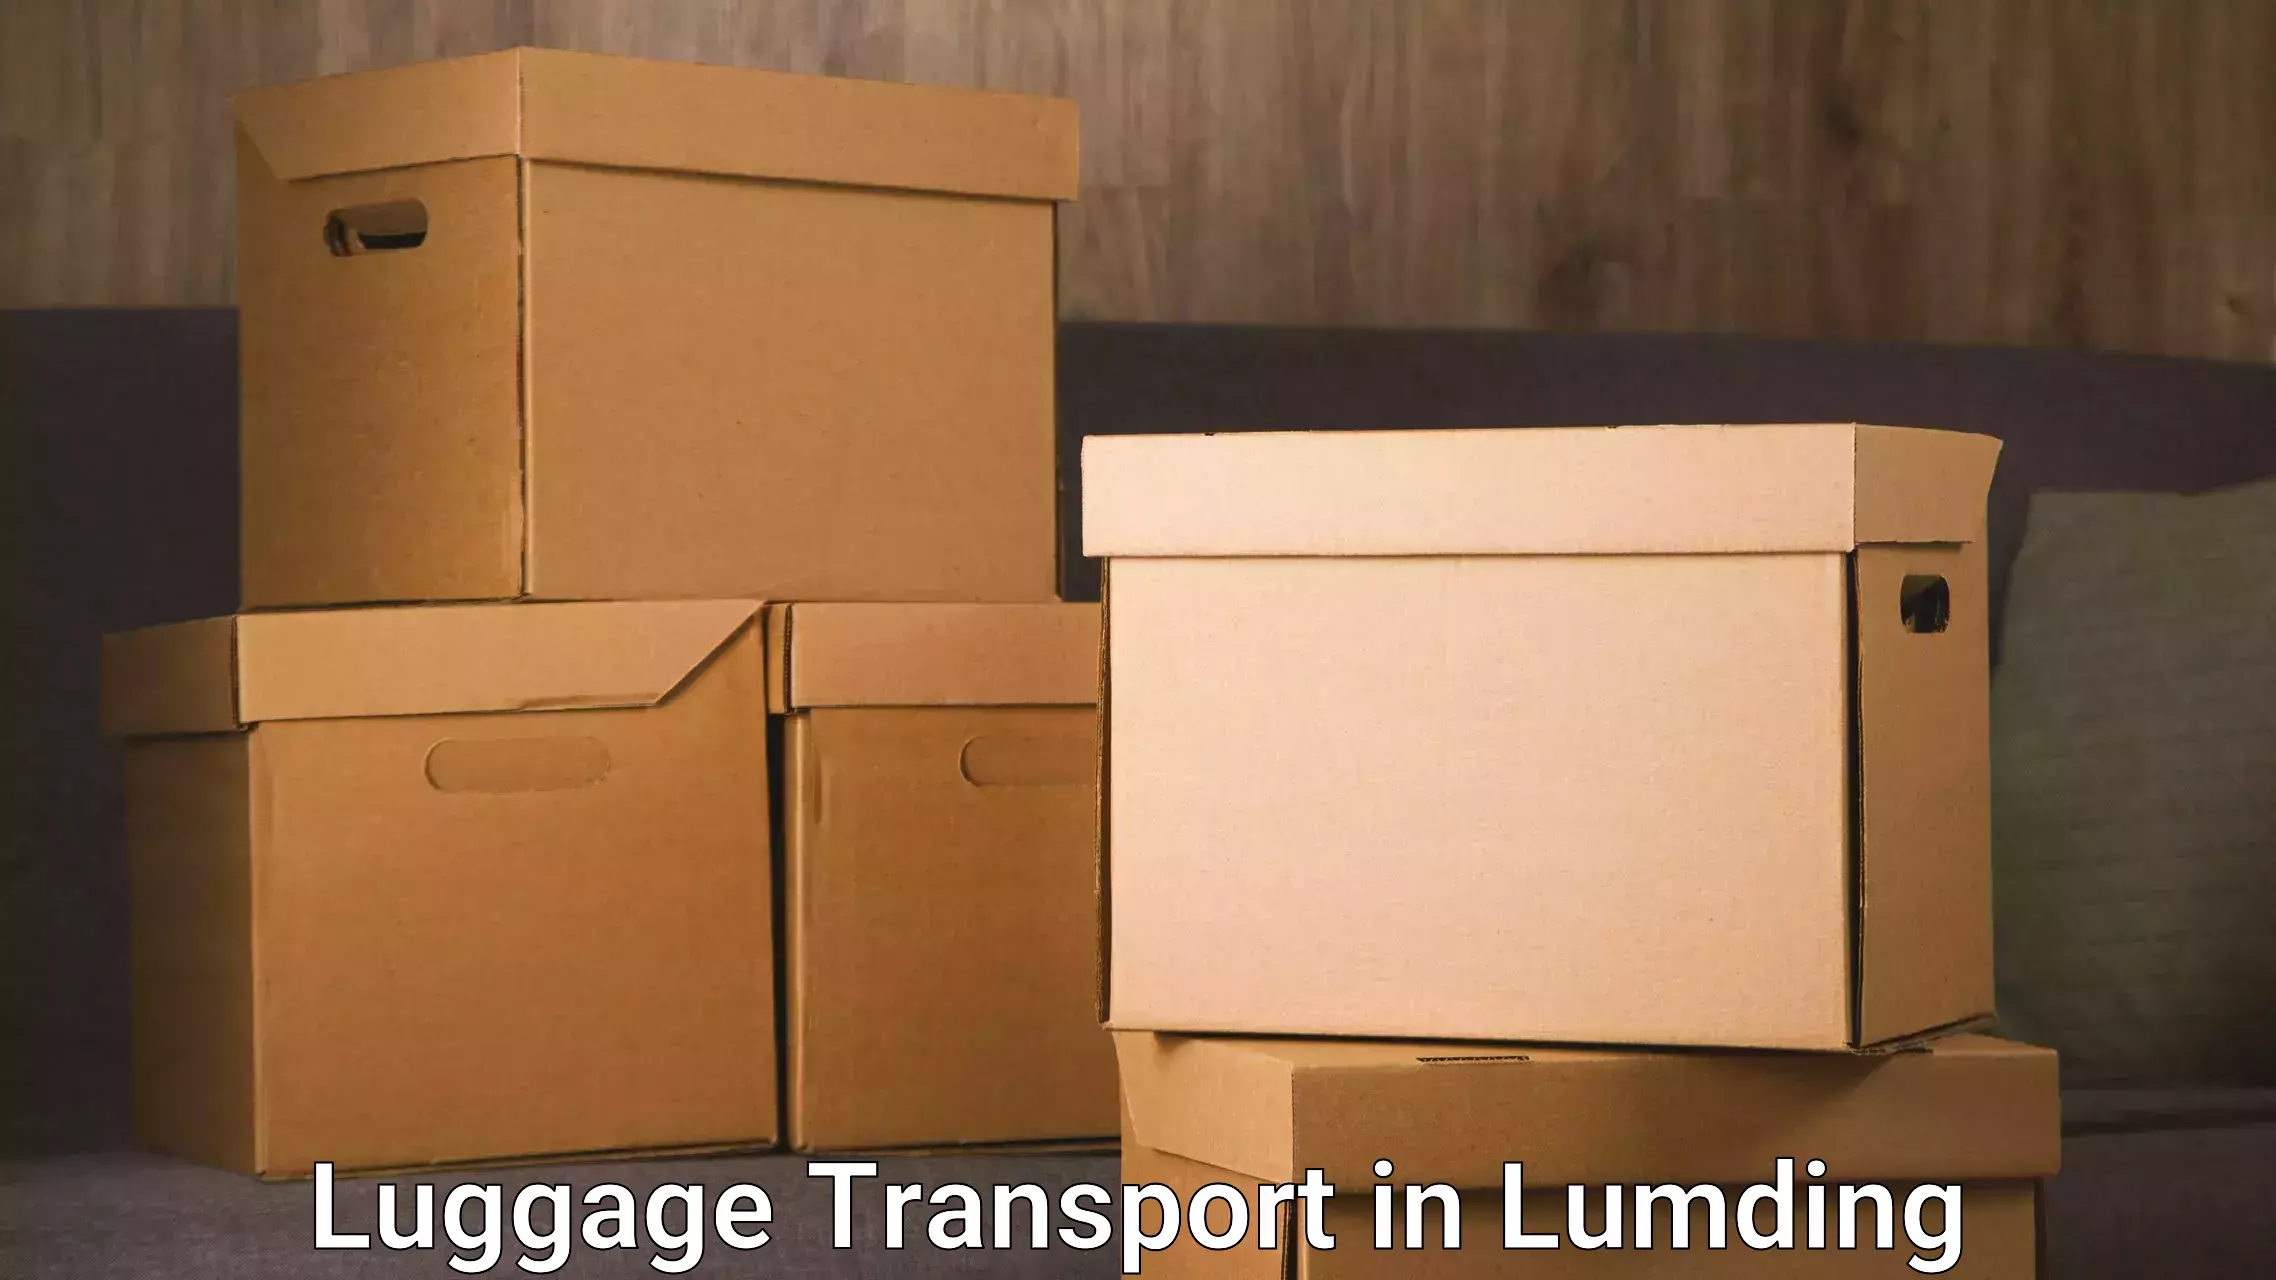 Luggage delivery optimization in Lumding